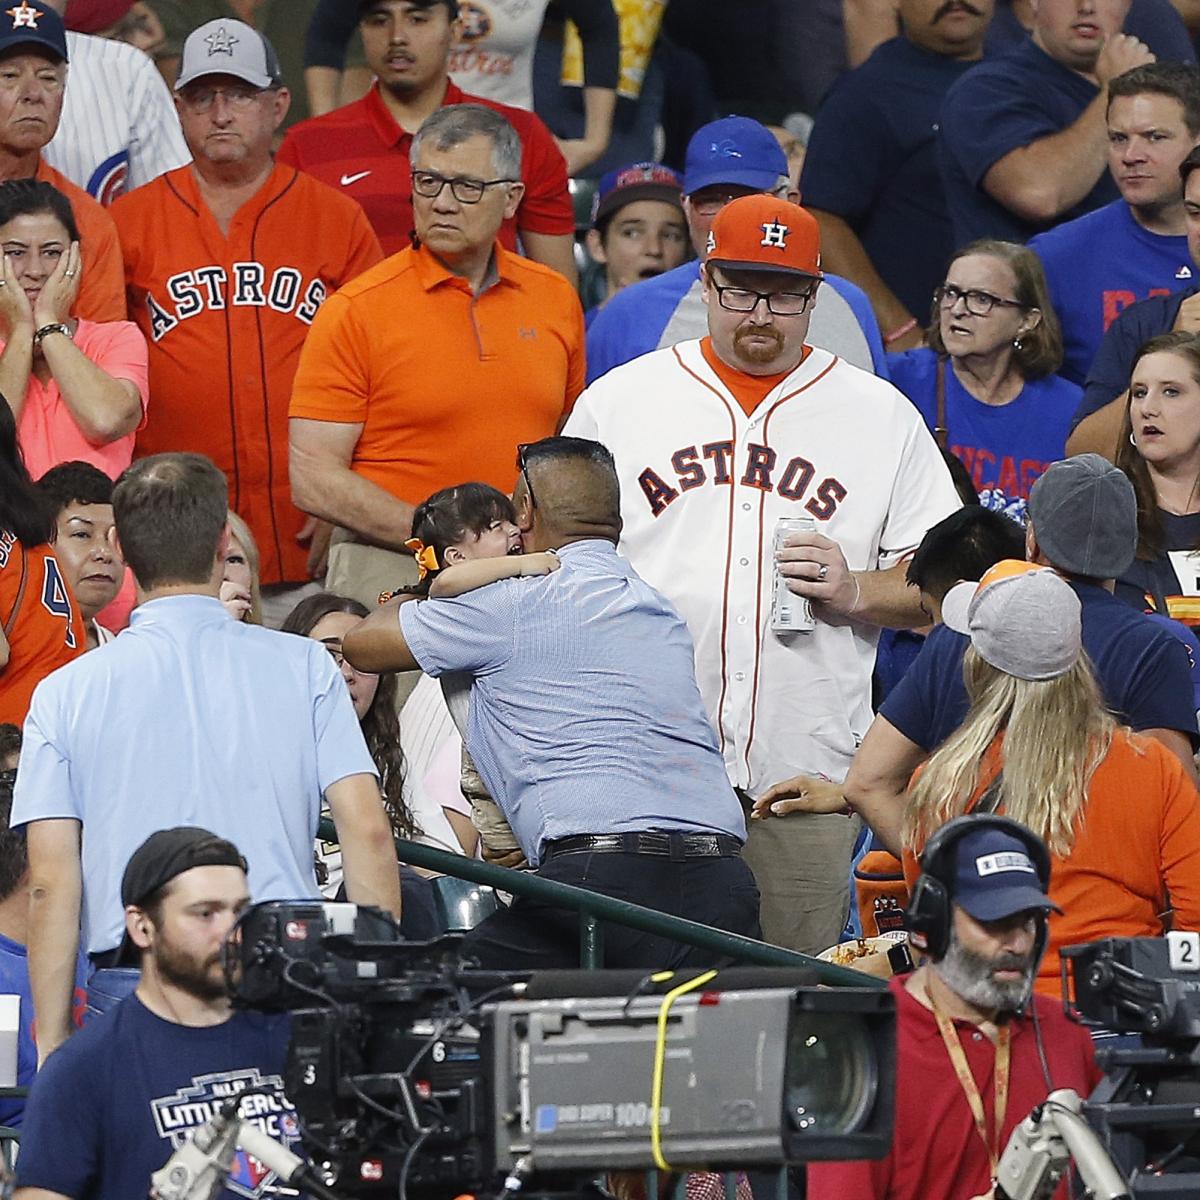 MLB Releases Statement on Young Girl Struck by Foul Ball: 'Extremely Upsetting'